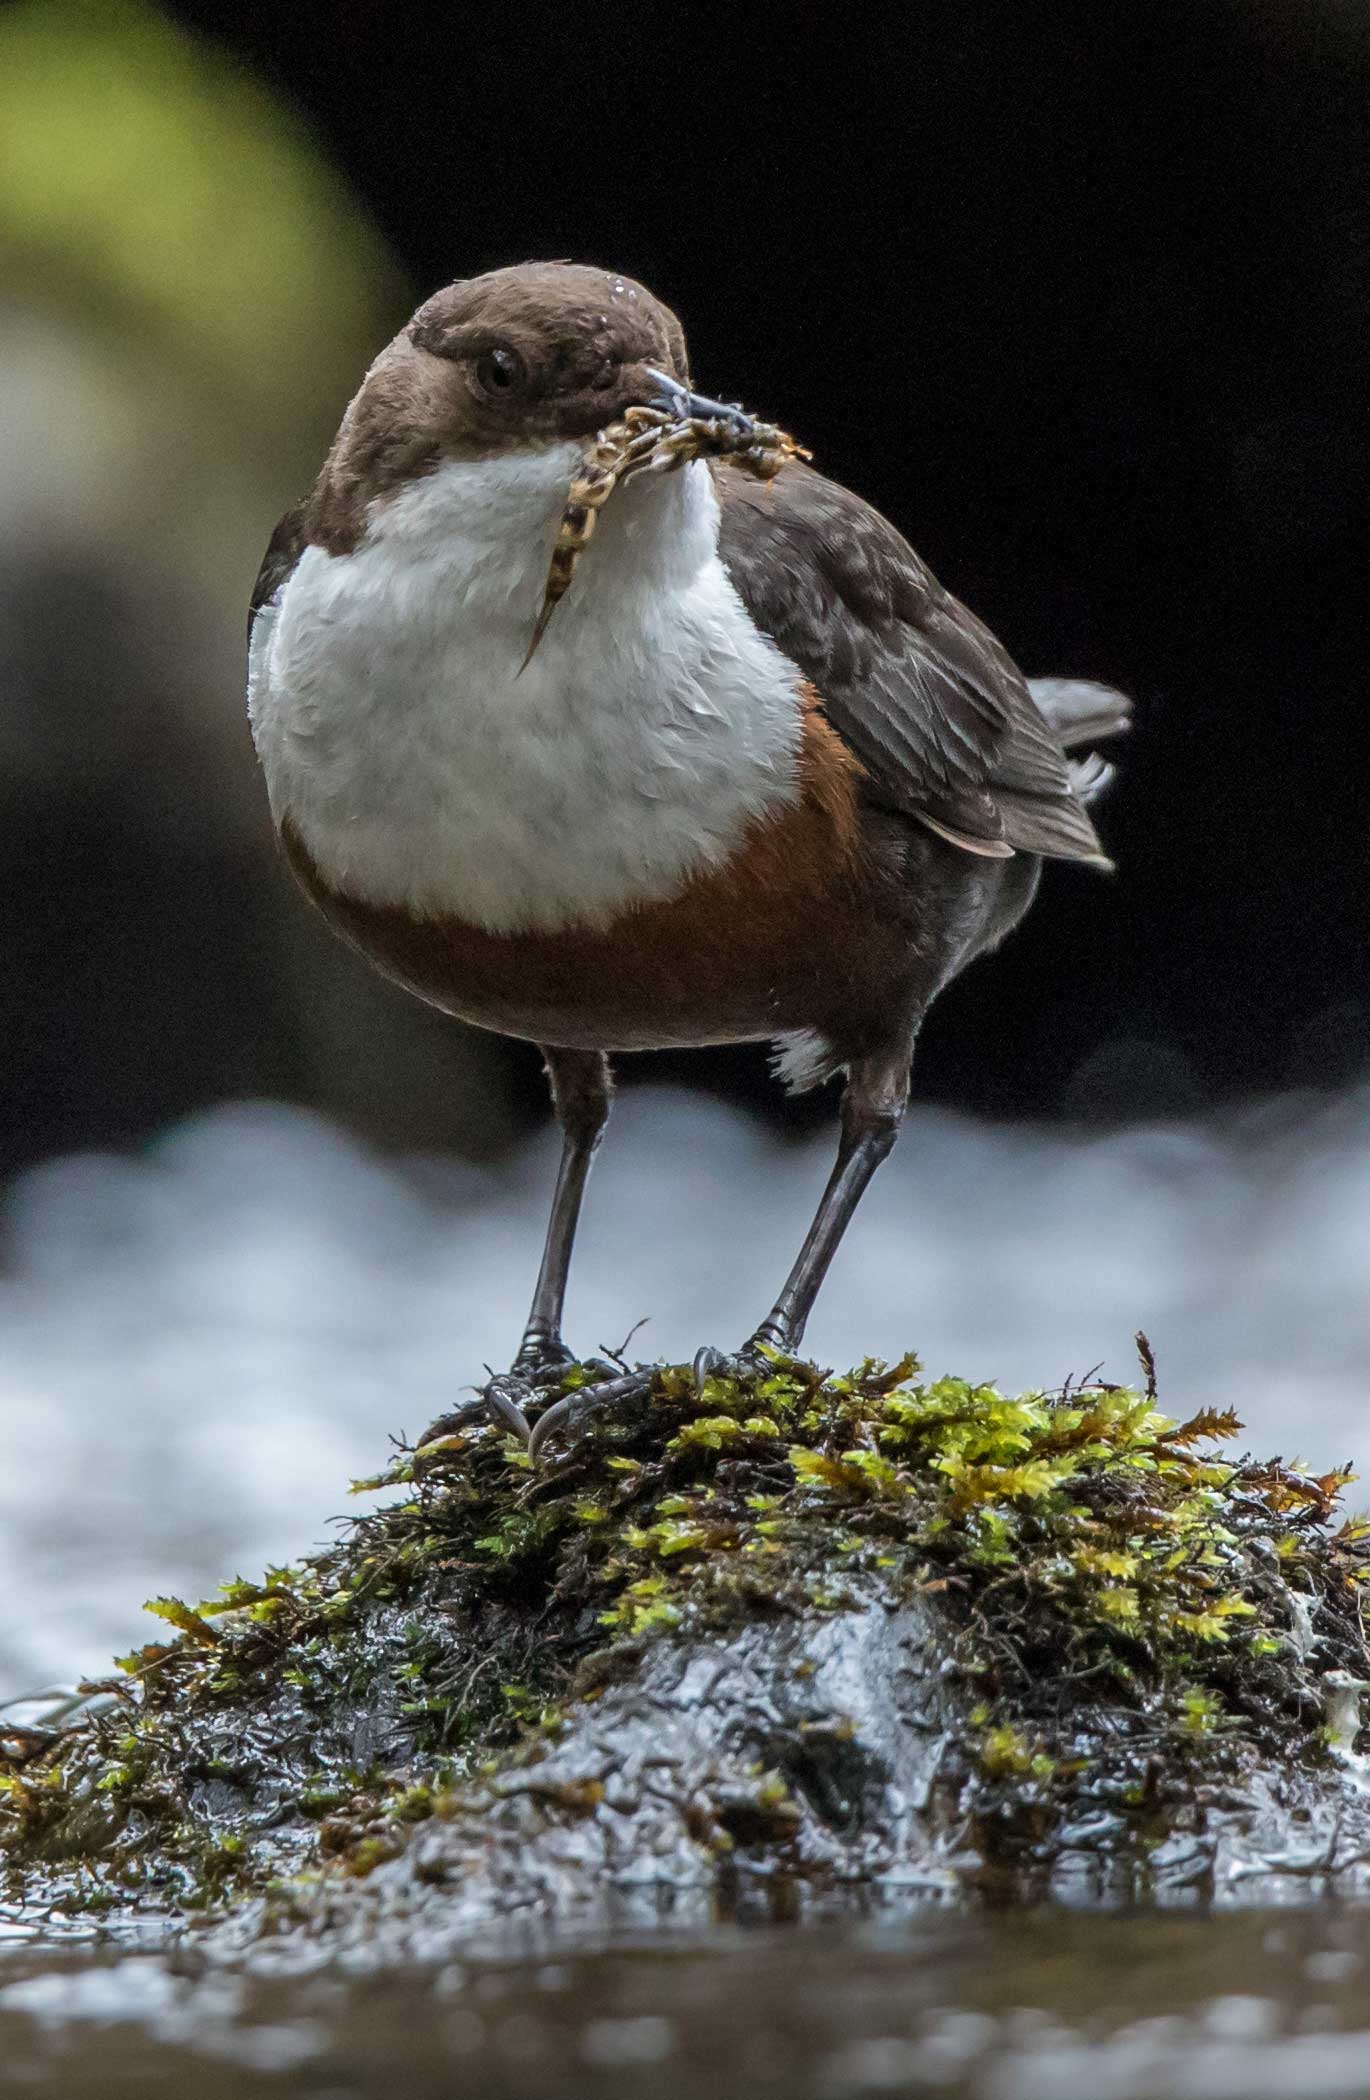 Dipper bird perched on a stone in a river with riverflies in its mouth. Credit Paul Harris.